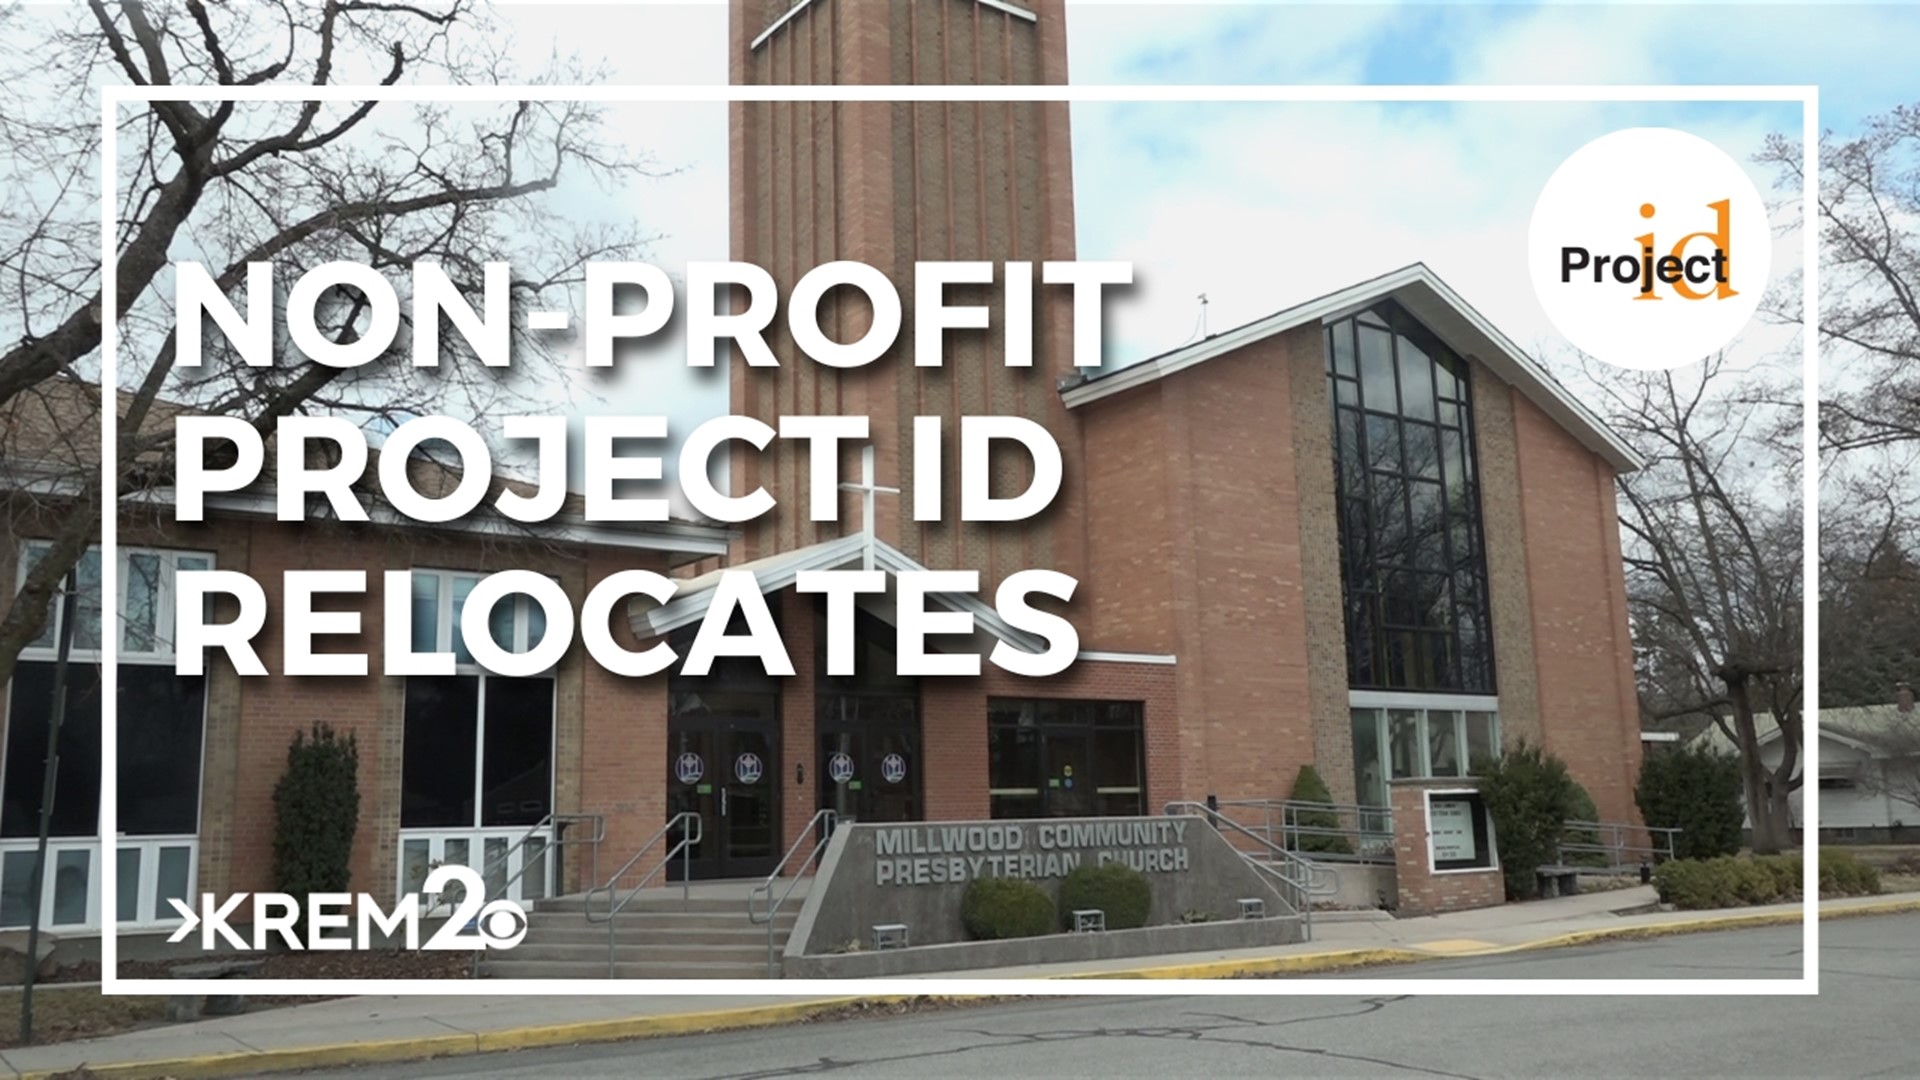 ProjectId will be relocated to a new facility at Millwood Community Presbyterian Church, located at 3223 N Marguerite Rd, Millwood, WA 99212.